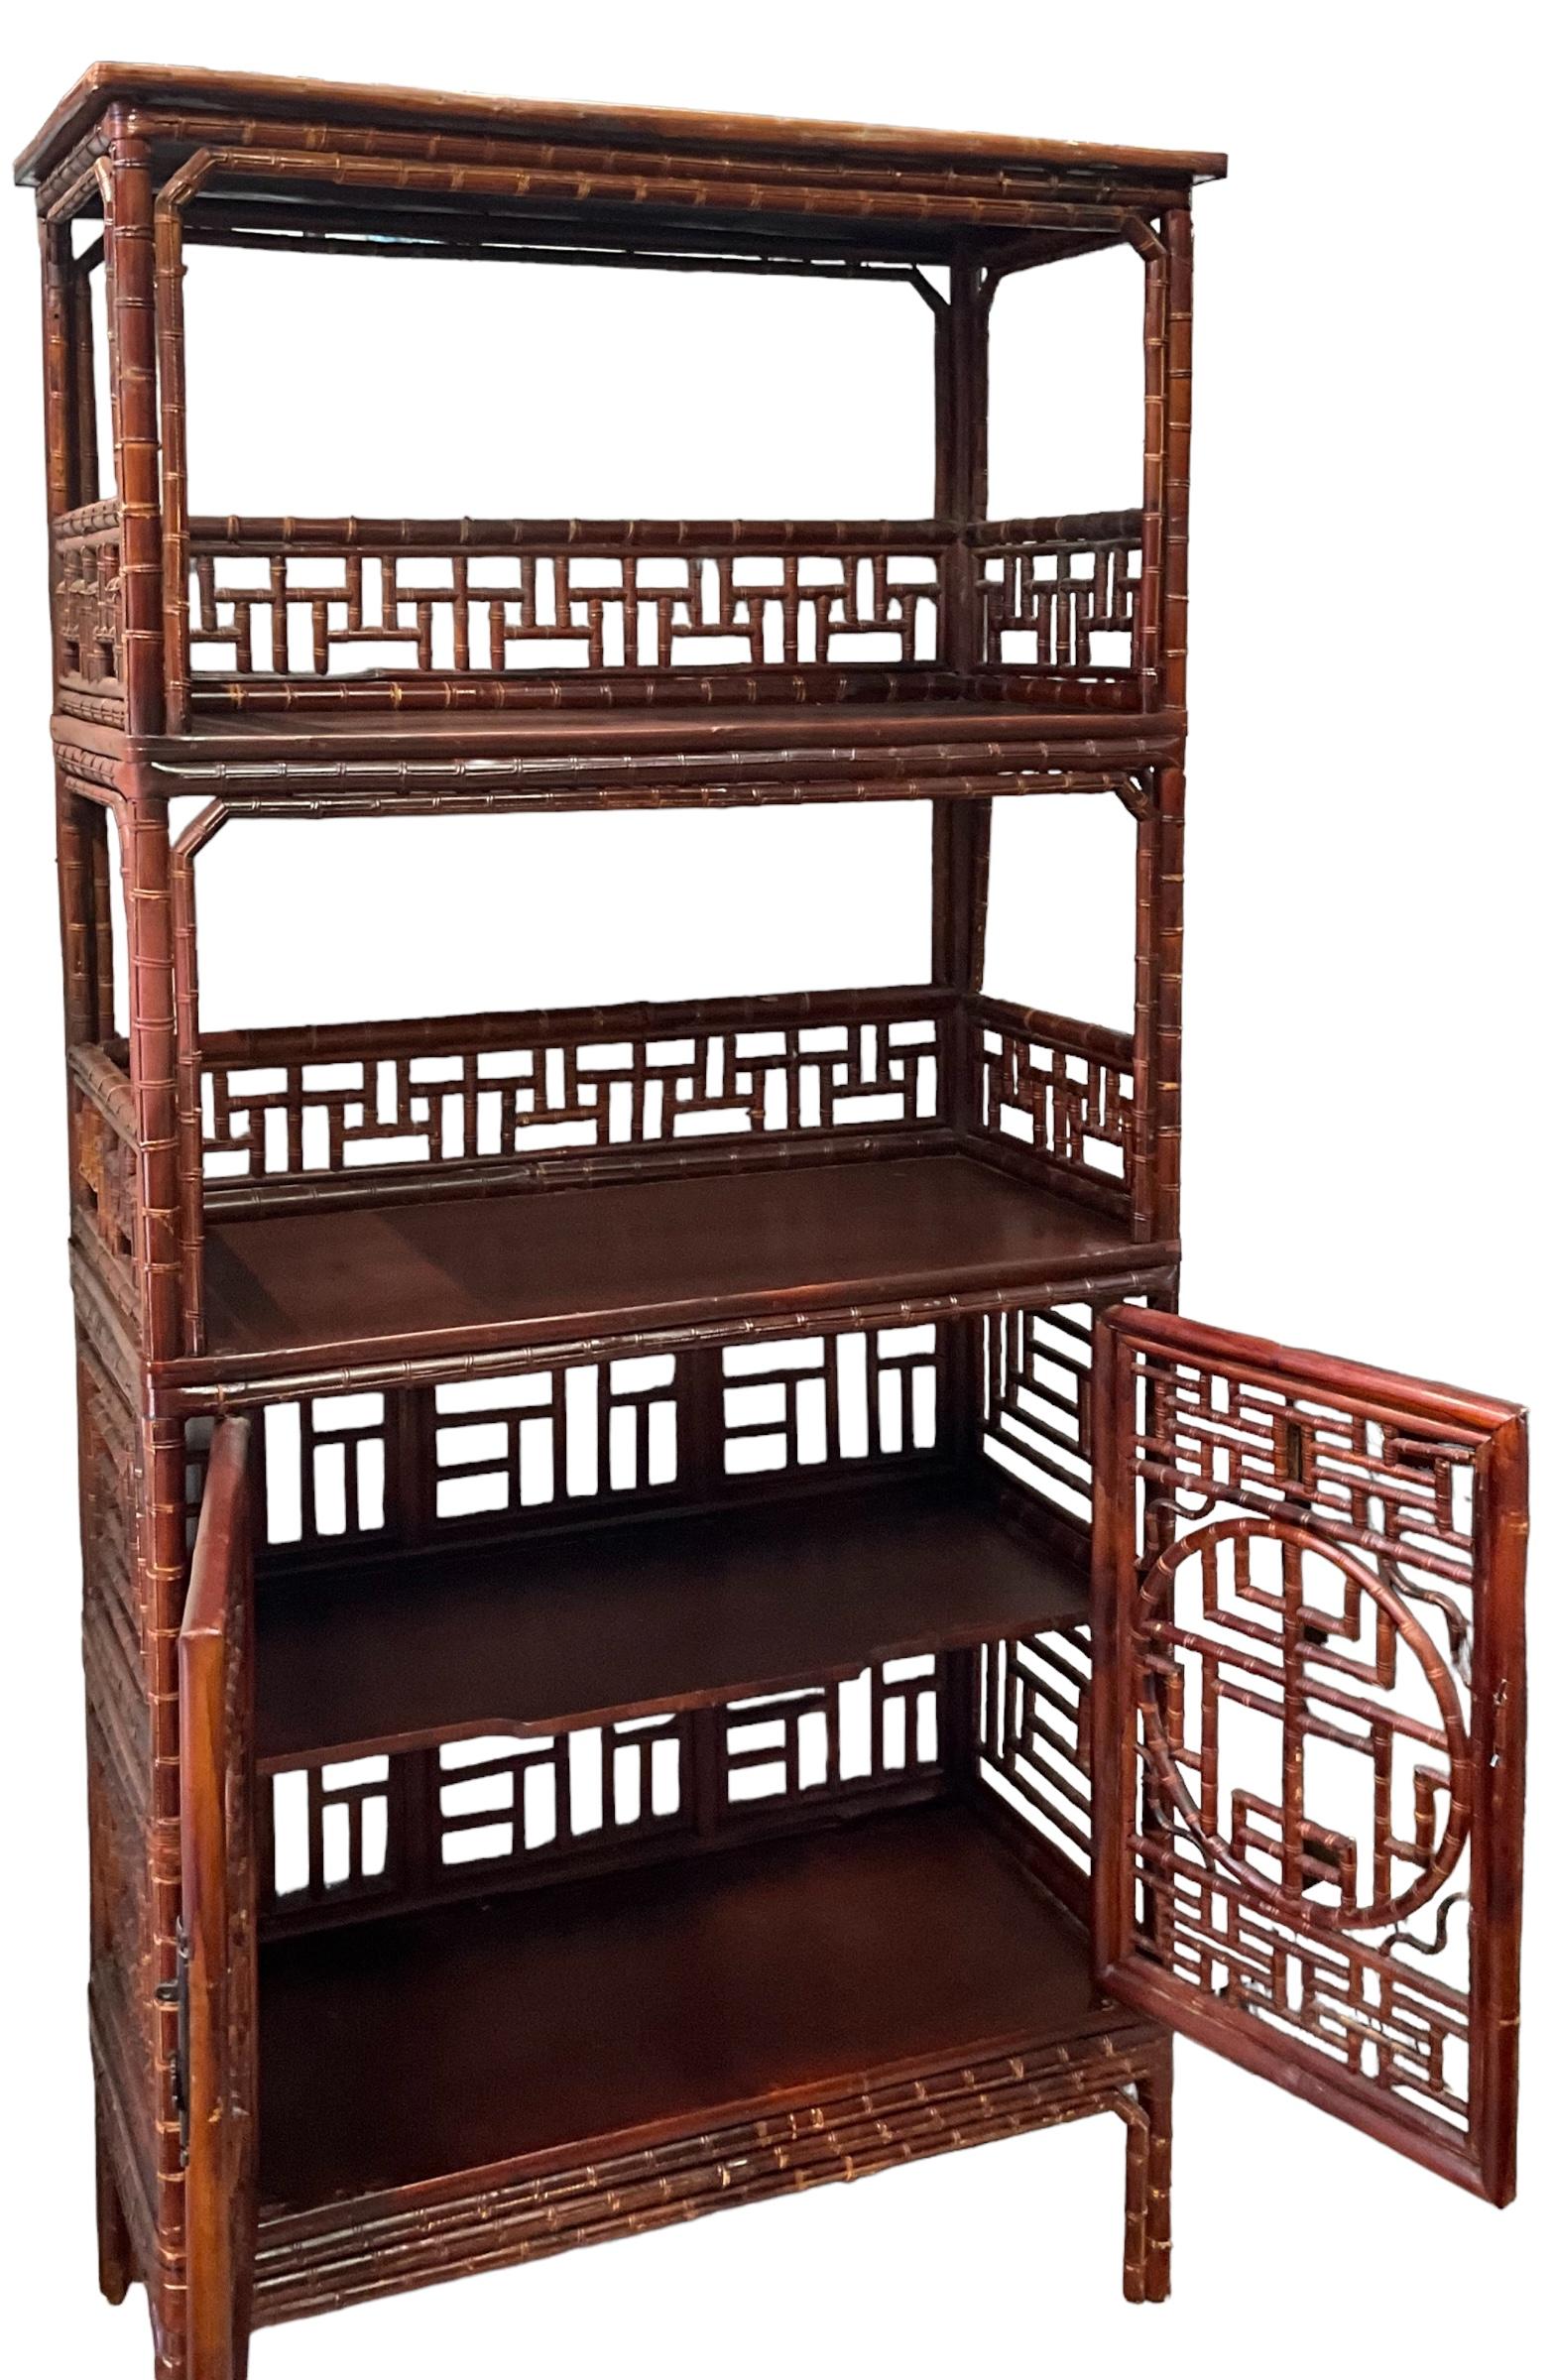 Aesthetic Movement Early 20th-C. Chinese Bamboo Cabinet / Etagere / Bookcase With Ornate Fretwork  For Sale